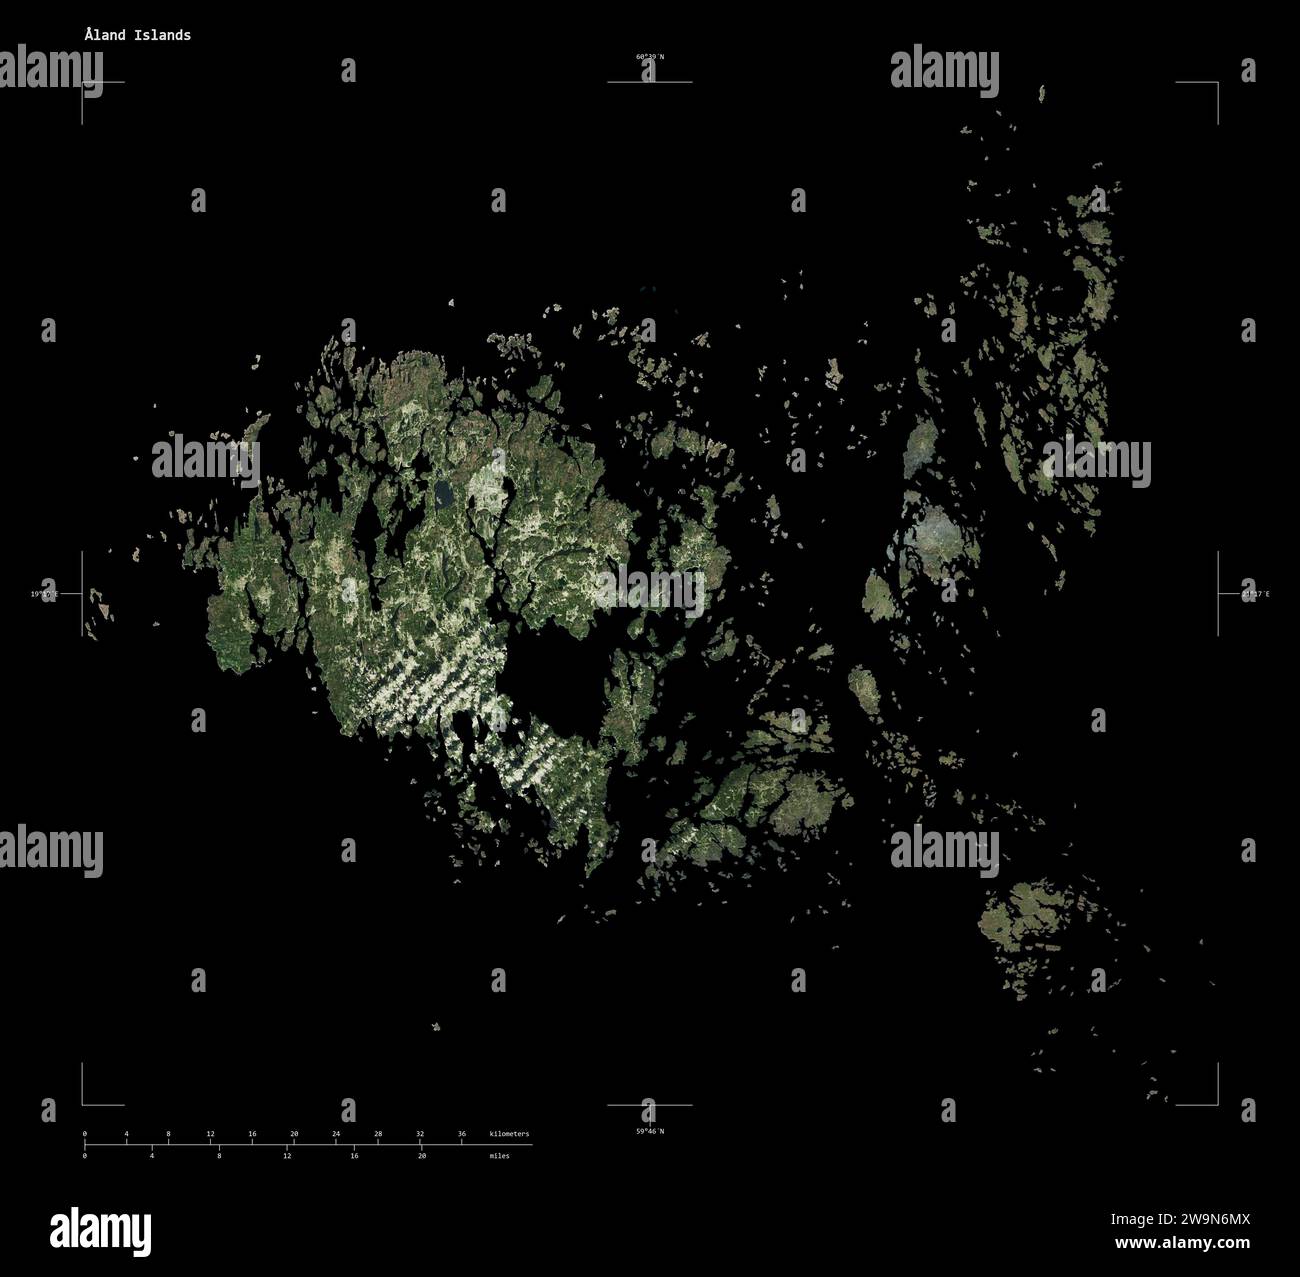 Shape of a high resolution satellite map of the Aland Islands, with distance scale and map border coordinates, isolated on black Stock Photo